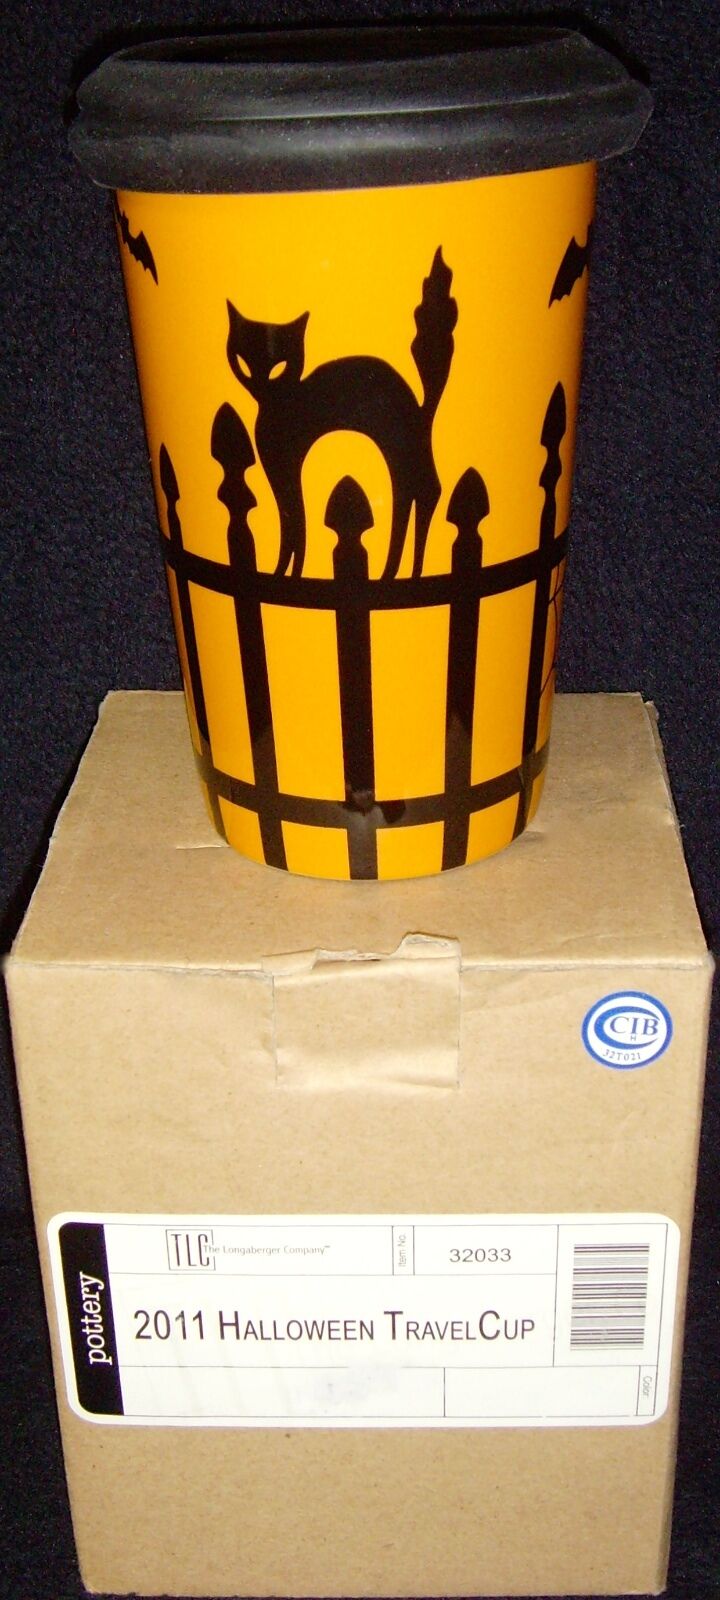 Brand New in Box•Longaberger•Pottery•2011 Halloween Travel Cup•Item No. 32033